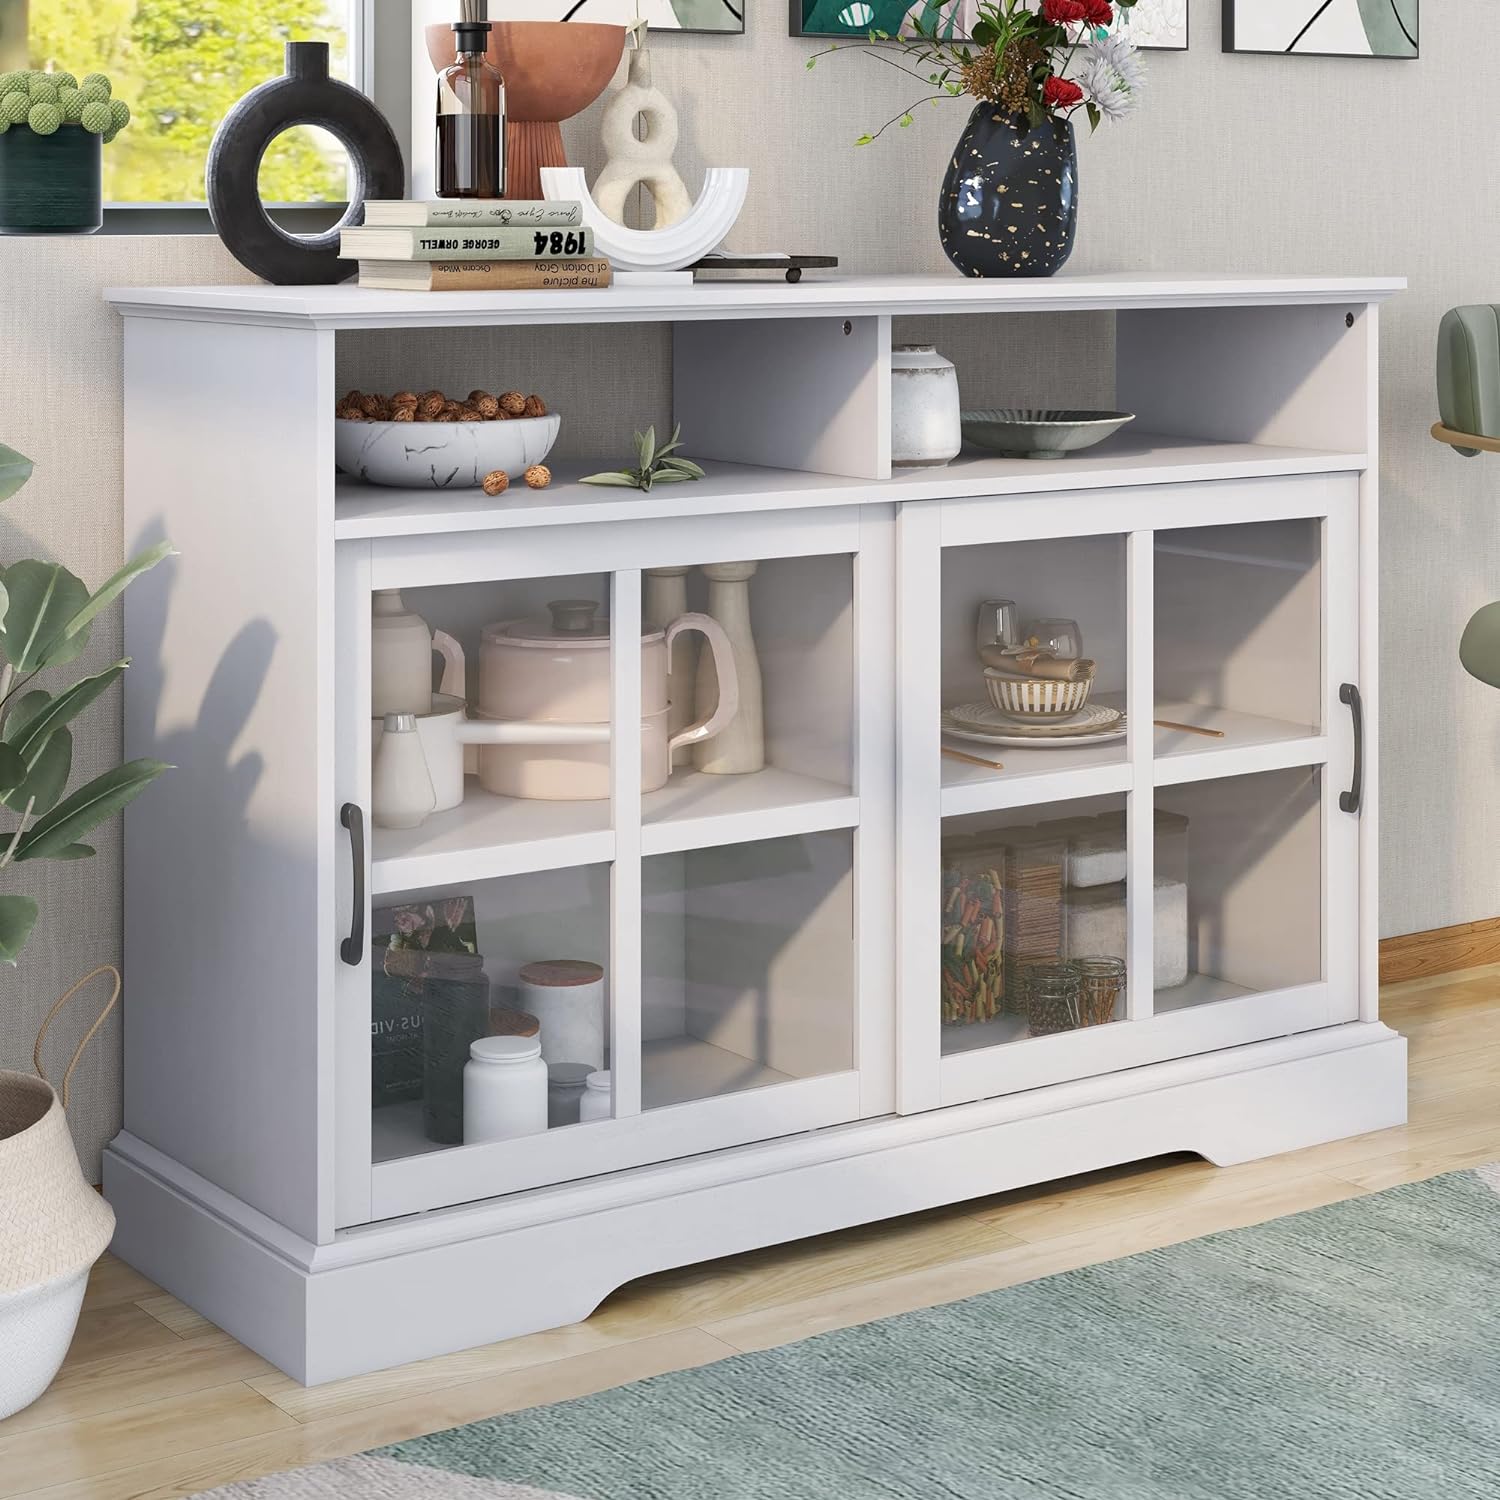 WILLIAMSPACE 47.6 Sideboard Buffet Cabinet, Modern Kitchen Sideboard Buffet with 2 Glass Sliding Doors and Adjustable Shelves Storage Cabinet for Dining Room - Antique White